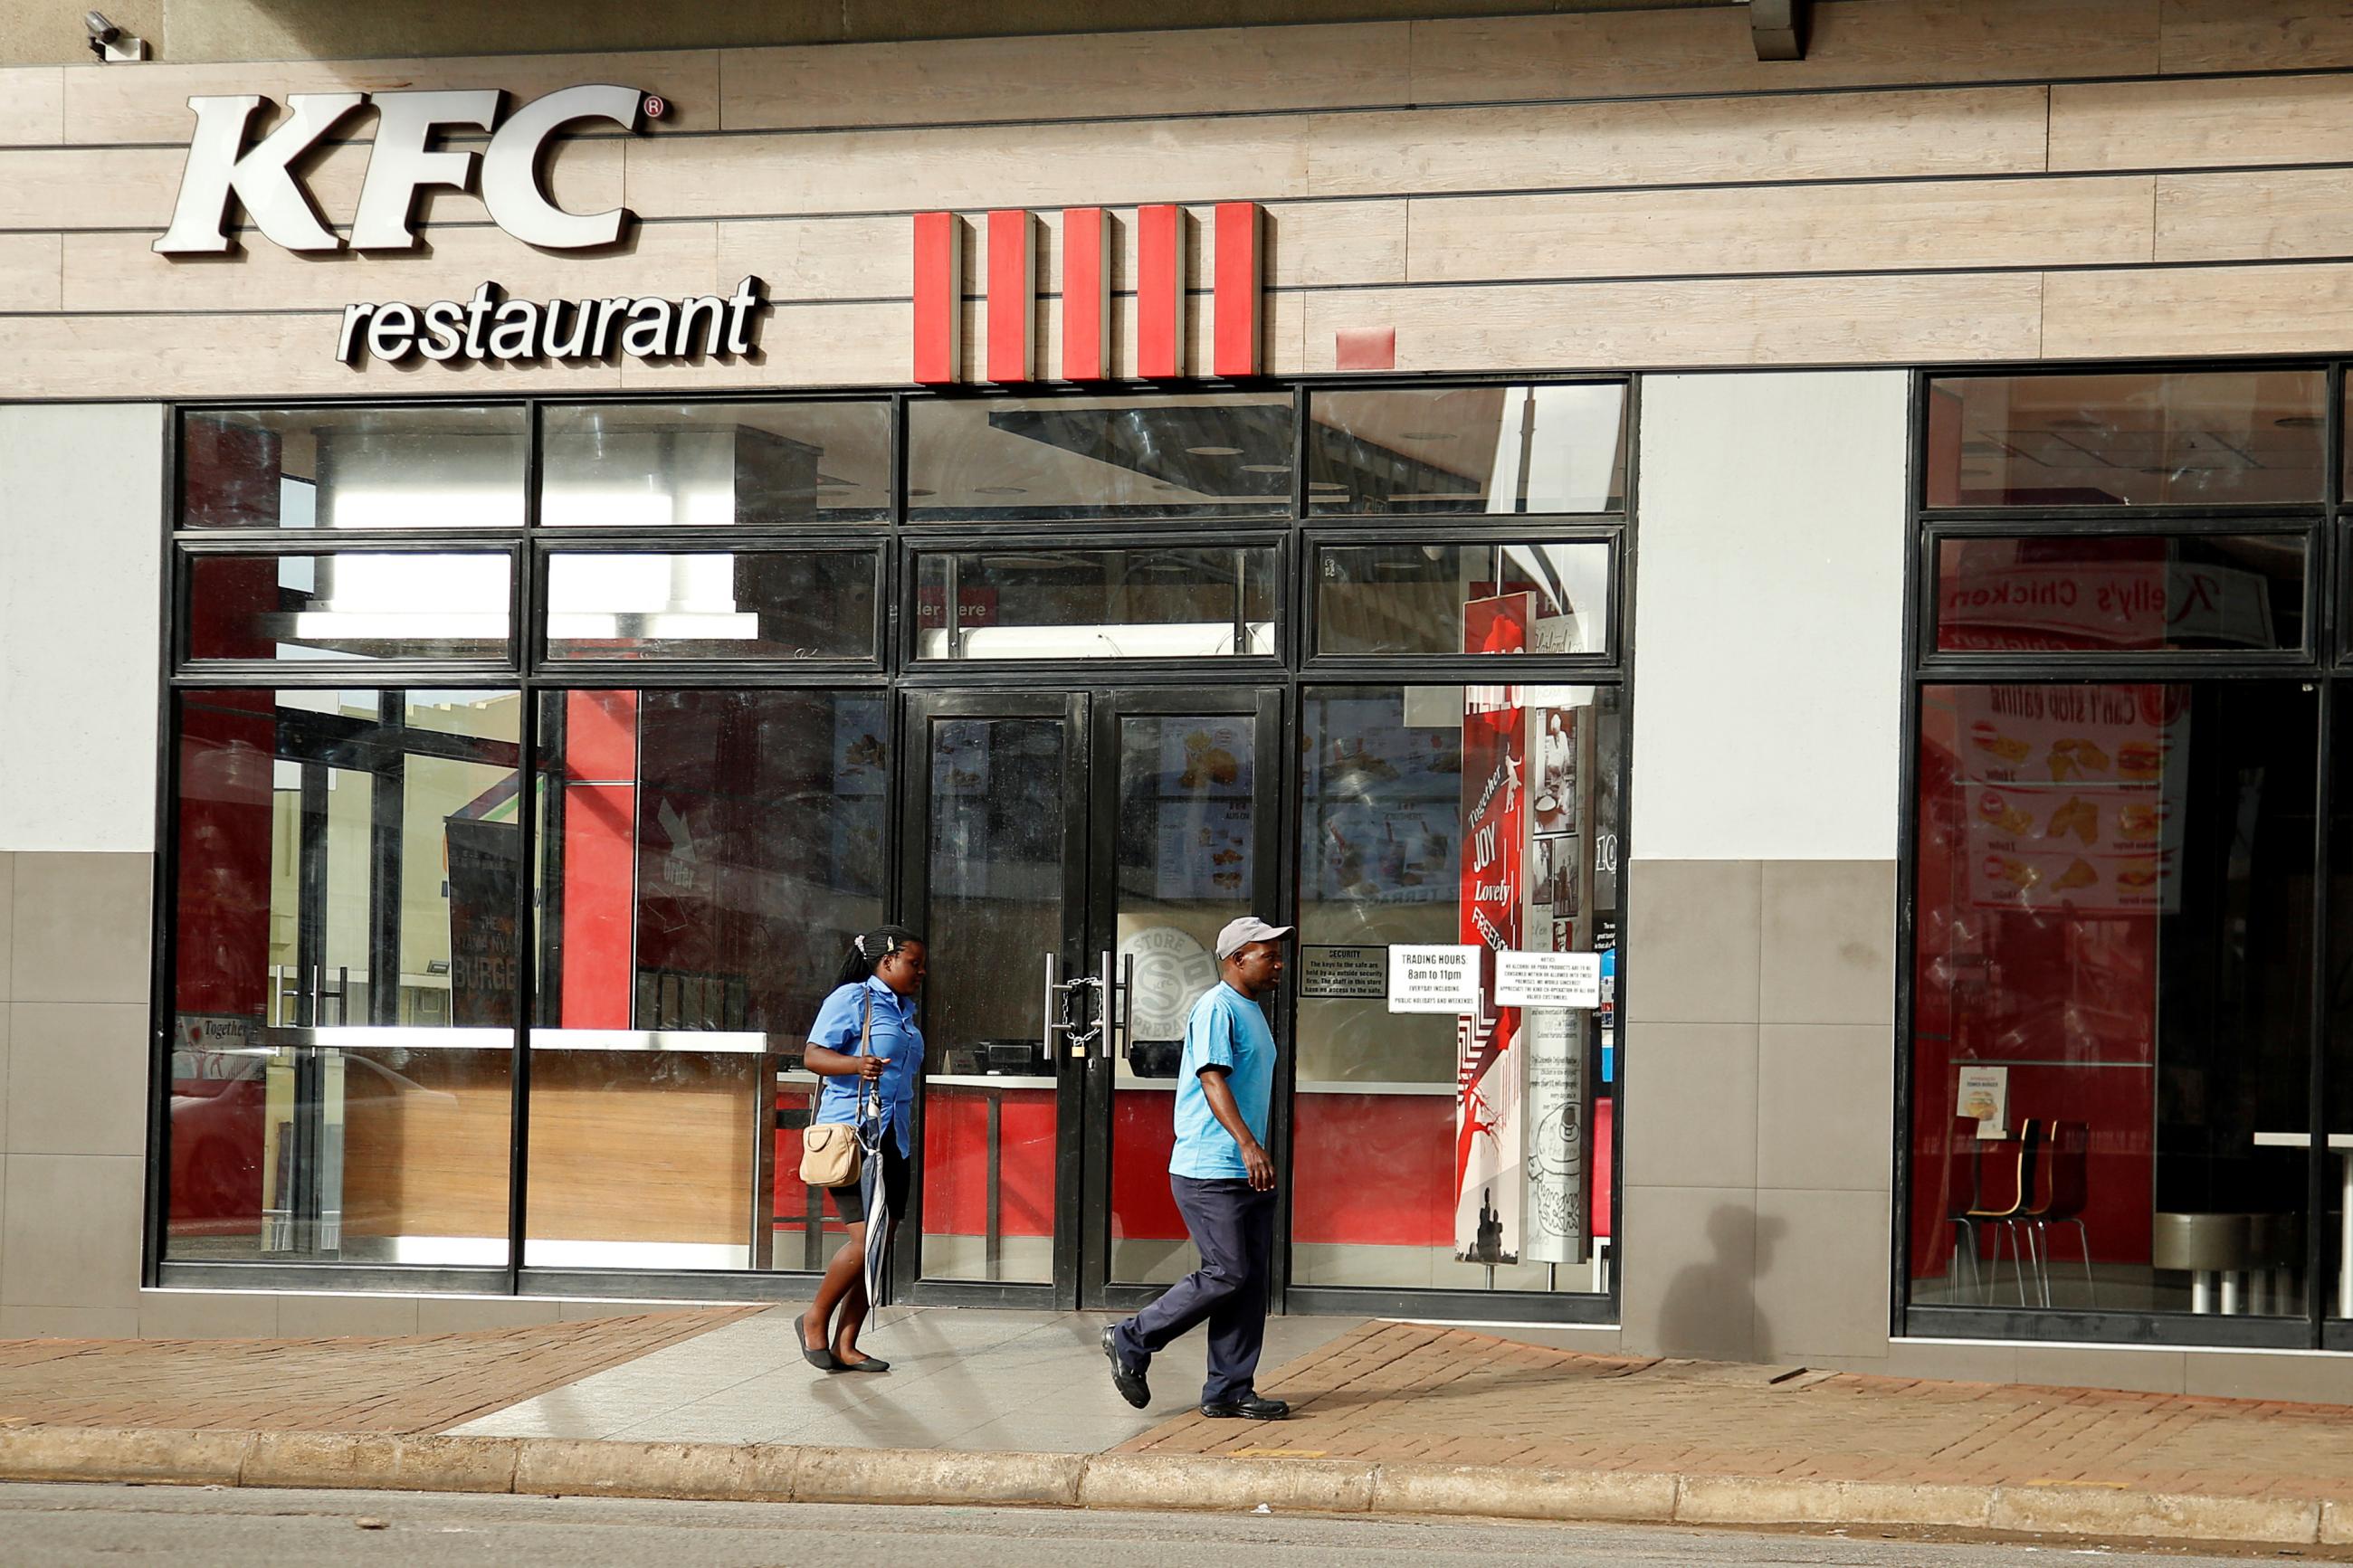 People walk past a KFC outlet in Harare, Zimbabwe, on January 16, 2019. REUTERS/Philimon Bulawayo